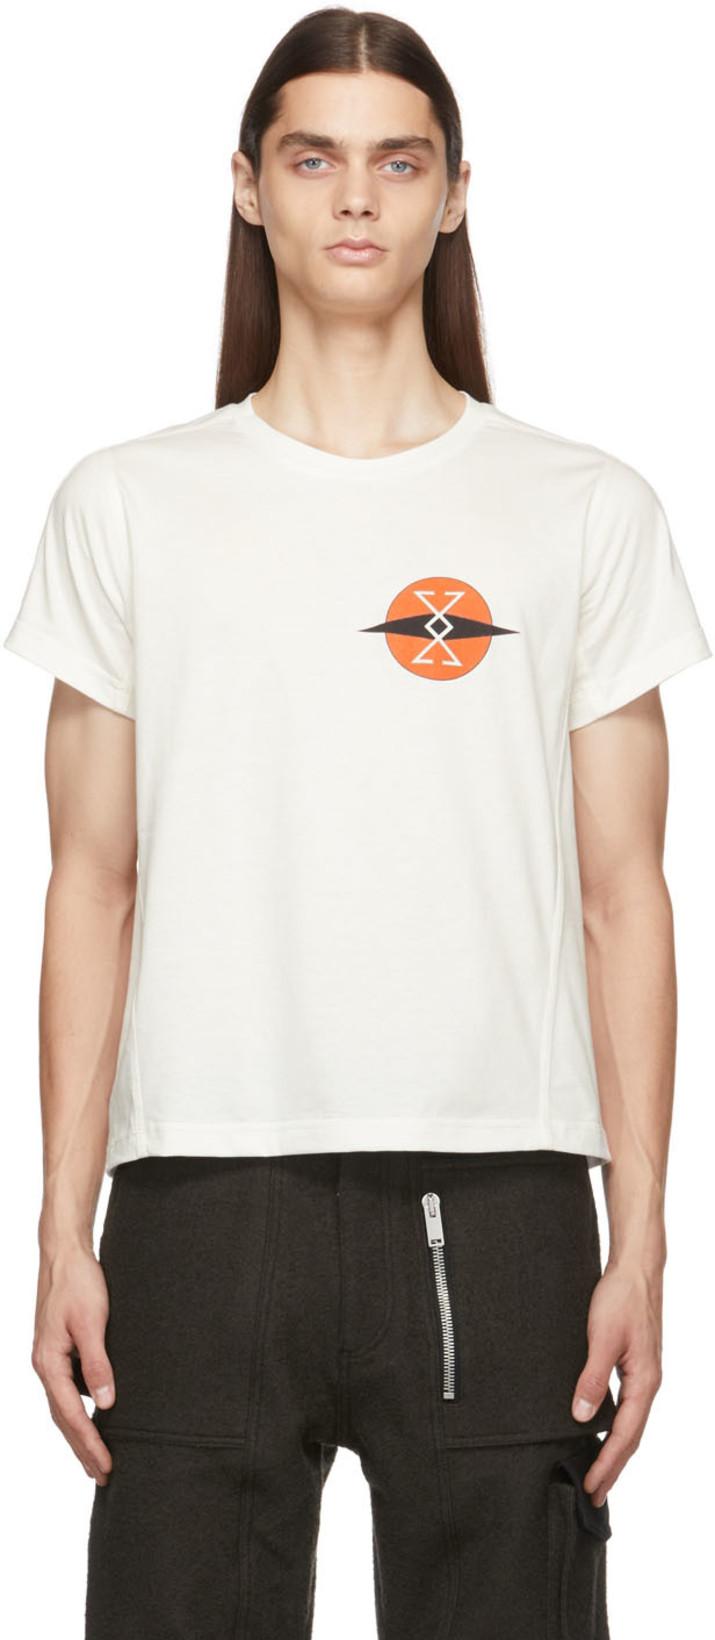 SSENSE Exclusive White Graphic T-Shirt by ADYAR